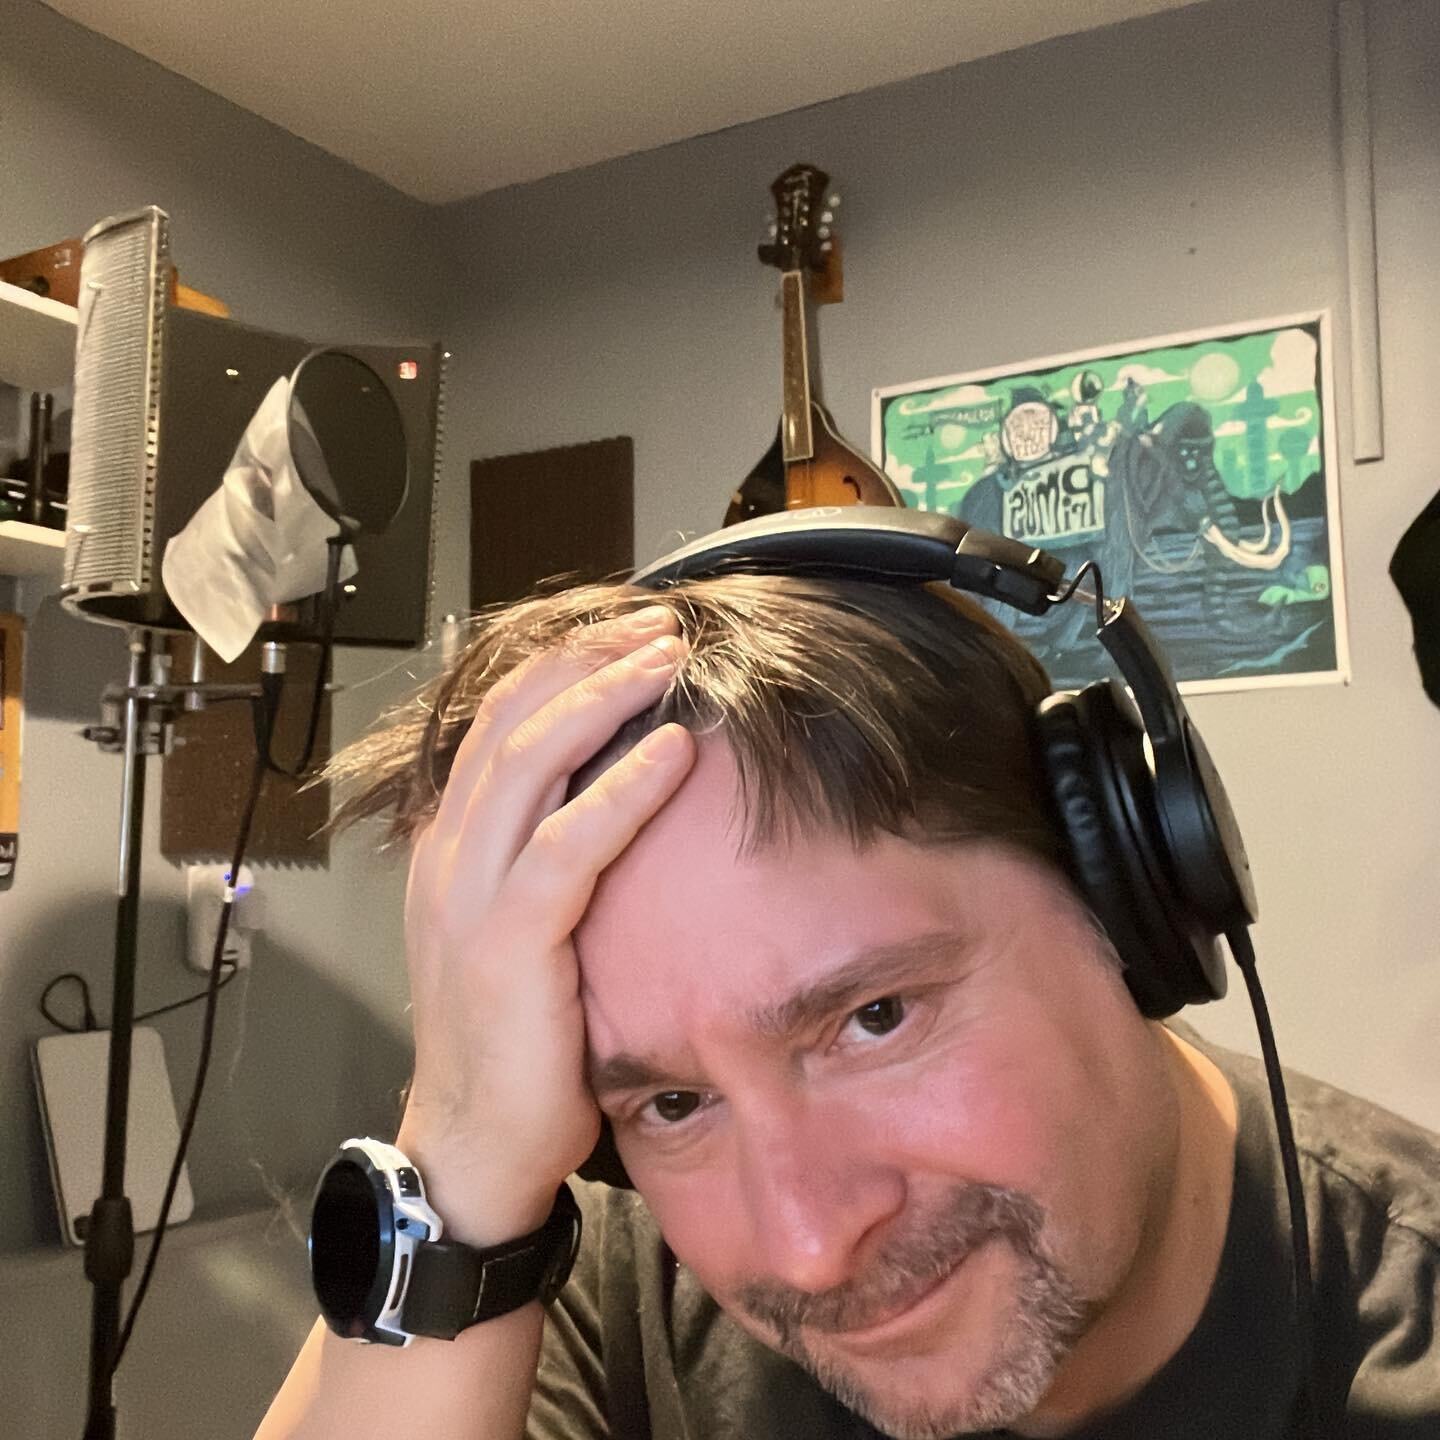 The plague has left the building and the only plague left is me. Let&rsquo;s continue recording after this bump in the road. I hope you are doing well. Tell me you are?